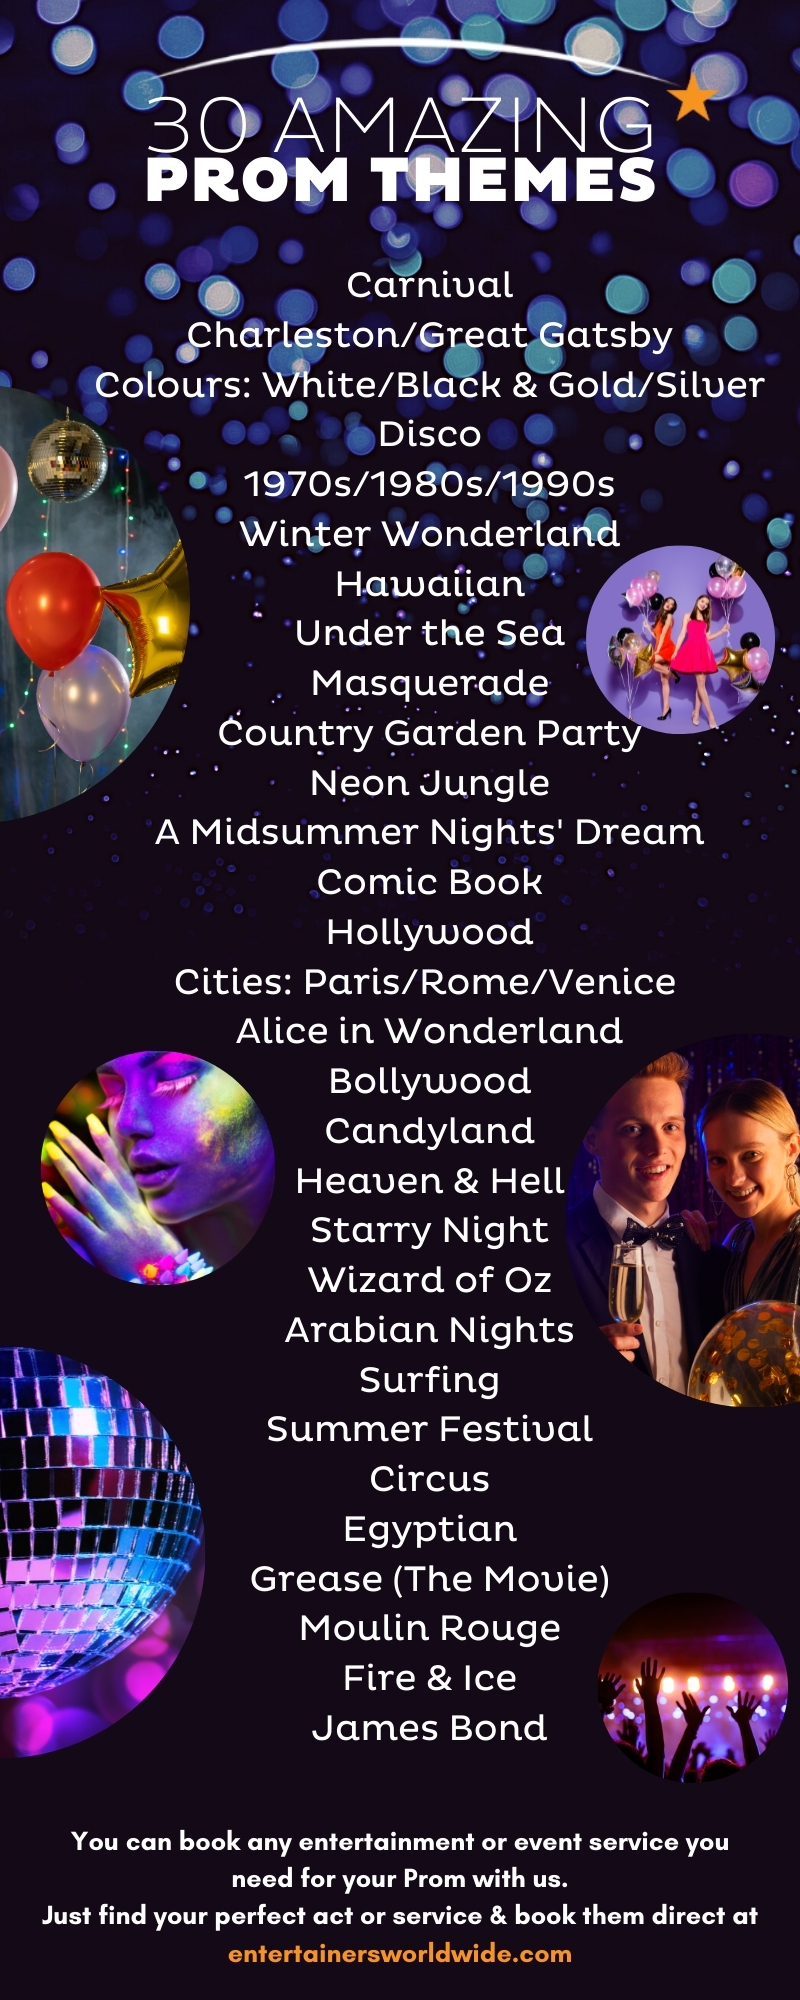 10 Perfect Prom Entertainment Ideas and 30 Prom Themes Video, Blog